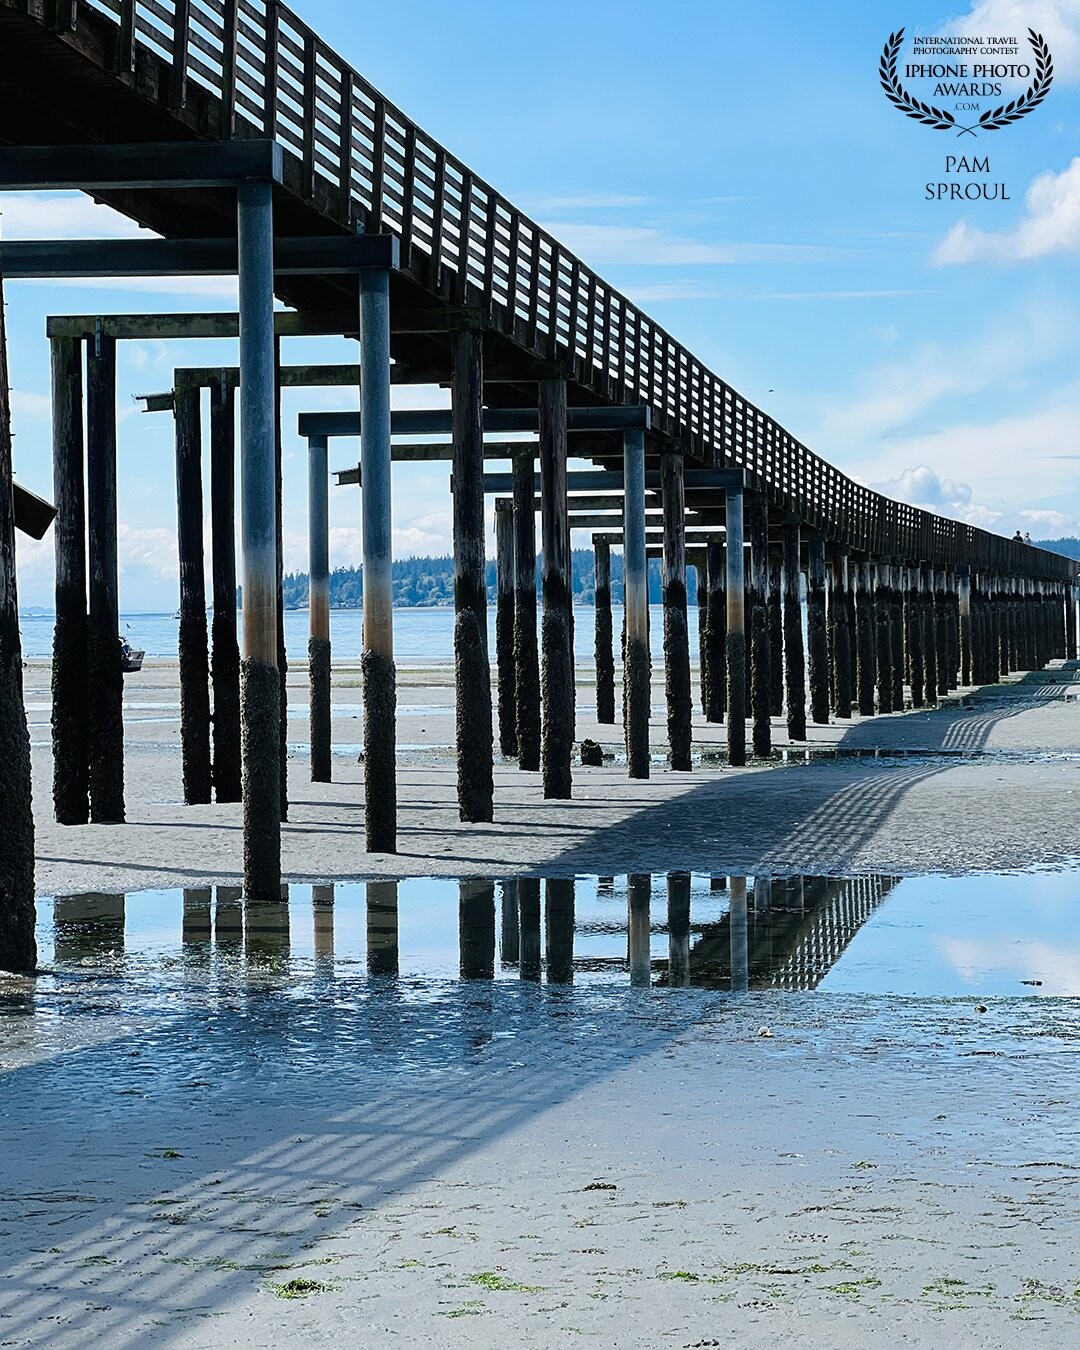 The magic of a long pier view set against the seaside. Grateful when the light, reflections and shadows all line up and grateful to have my iPhone ready to capture the beauty.<br />
<br />
“Pier Reflections”-2022